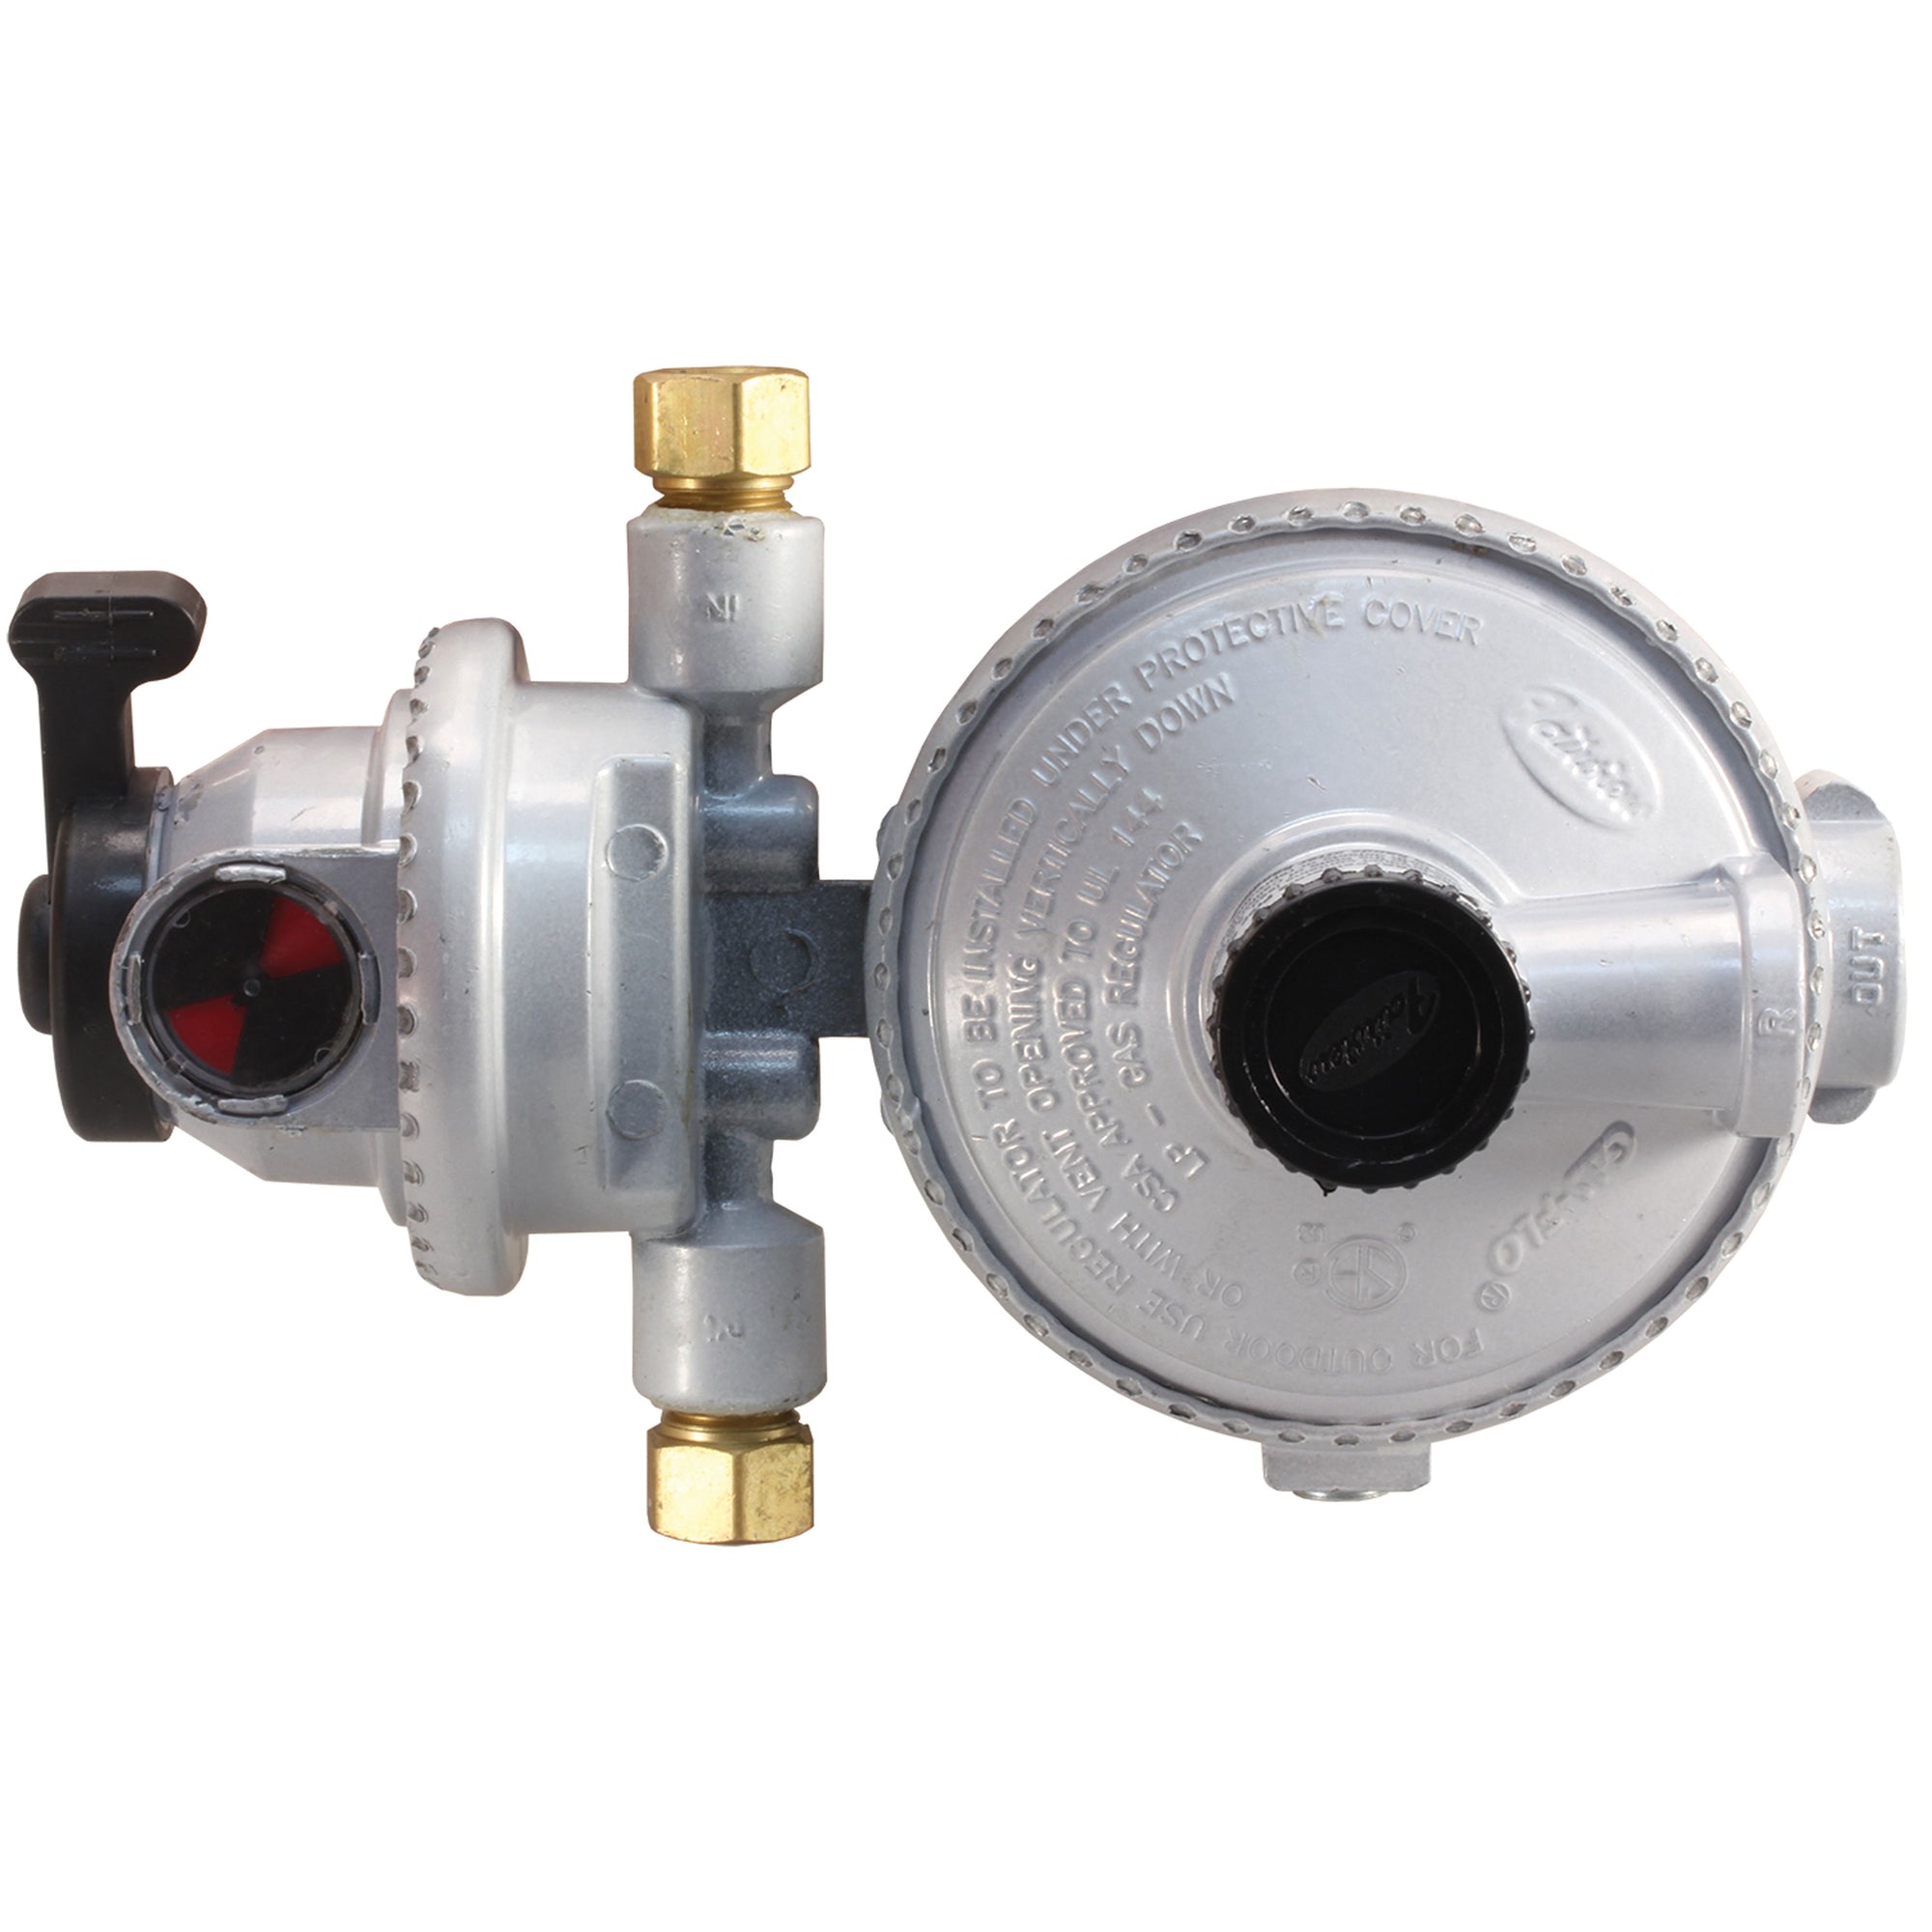 JR Products 07-30395 Automatic Changeover Regulator - Fairview Style